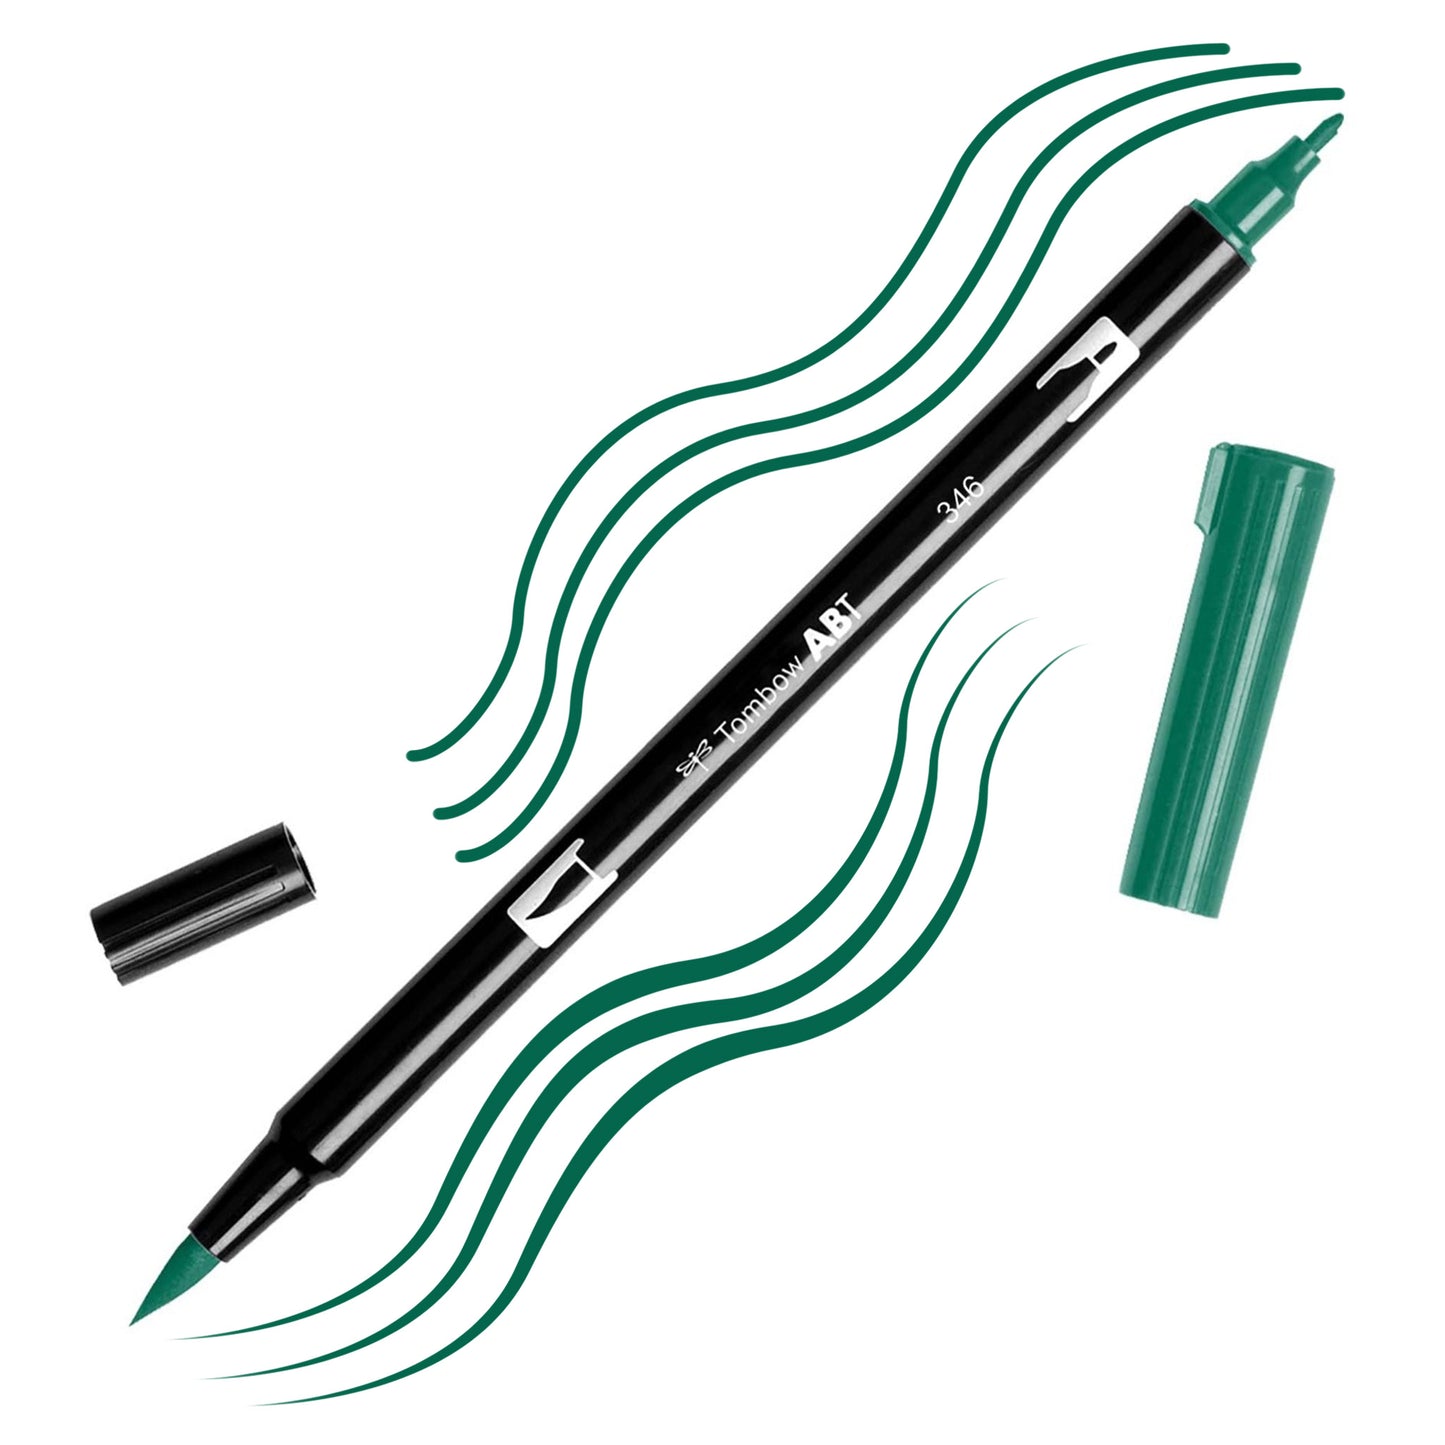 Sea Green Tombow double-headed brush-pen with a flexible nylon fiber brush tip and a fine tip against a white background with Sea Green strokes